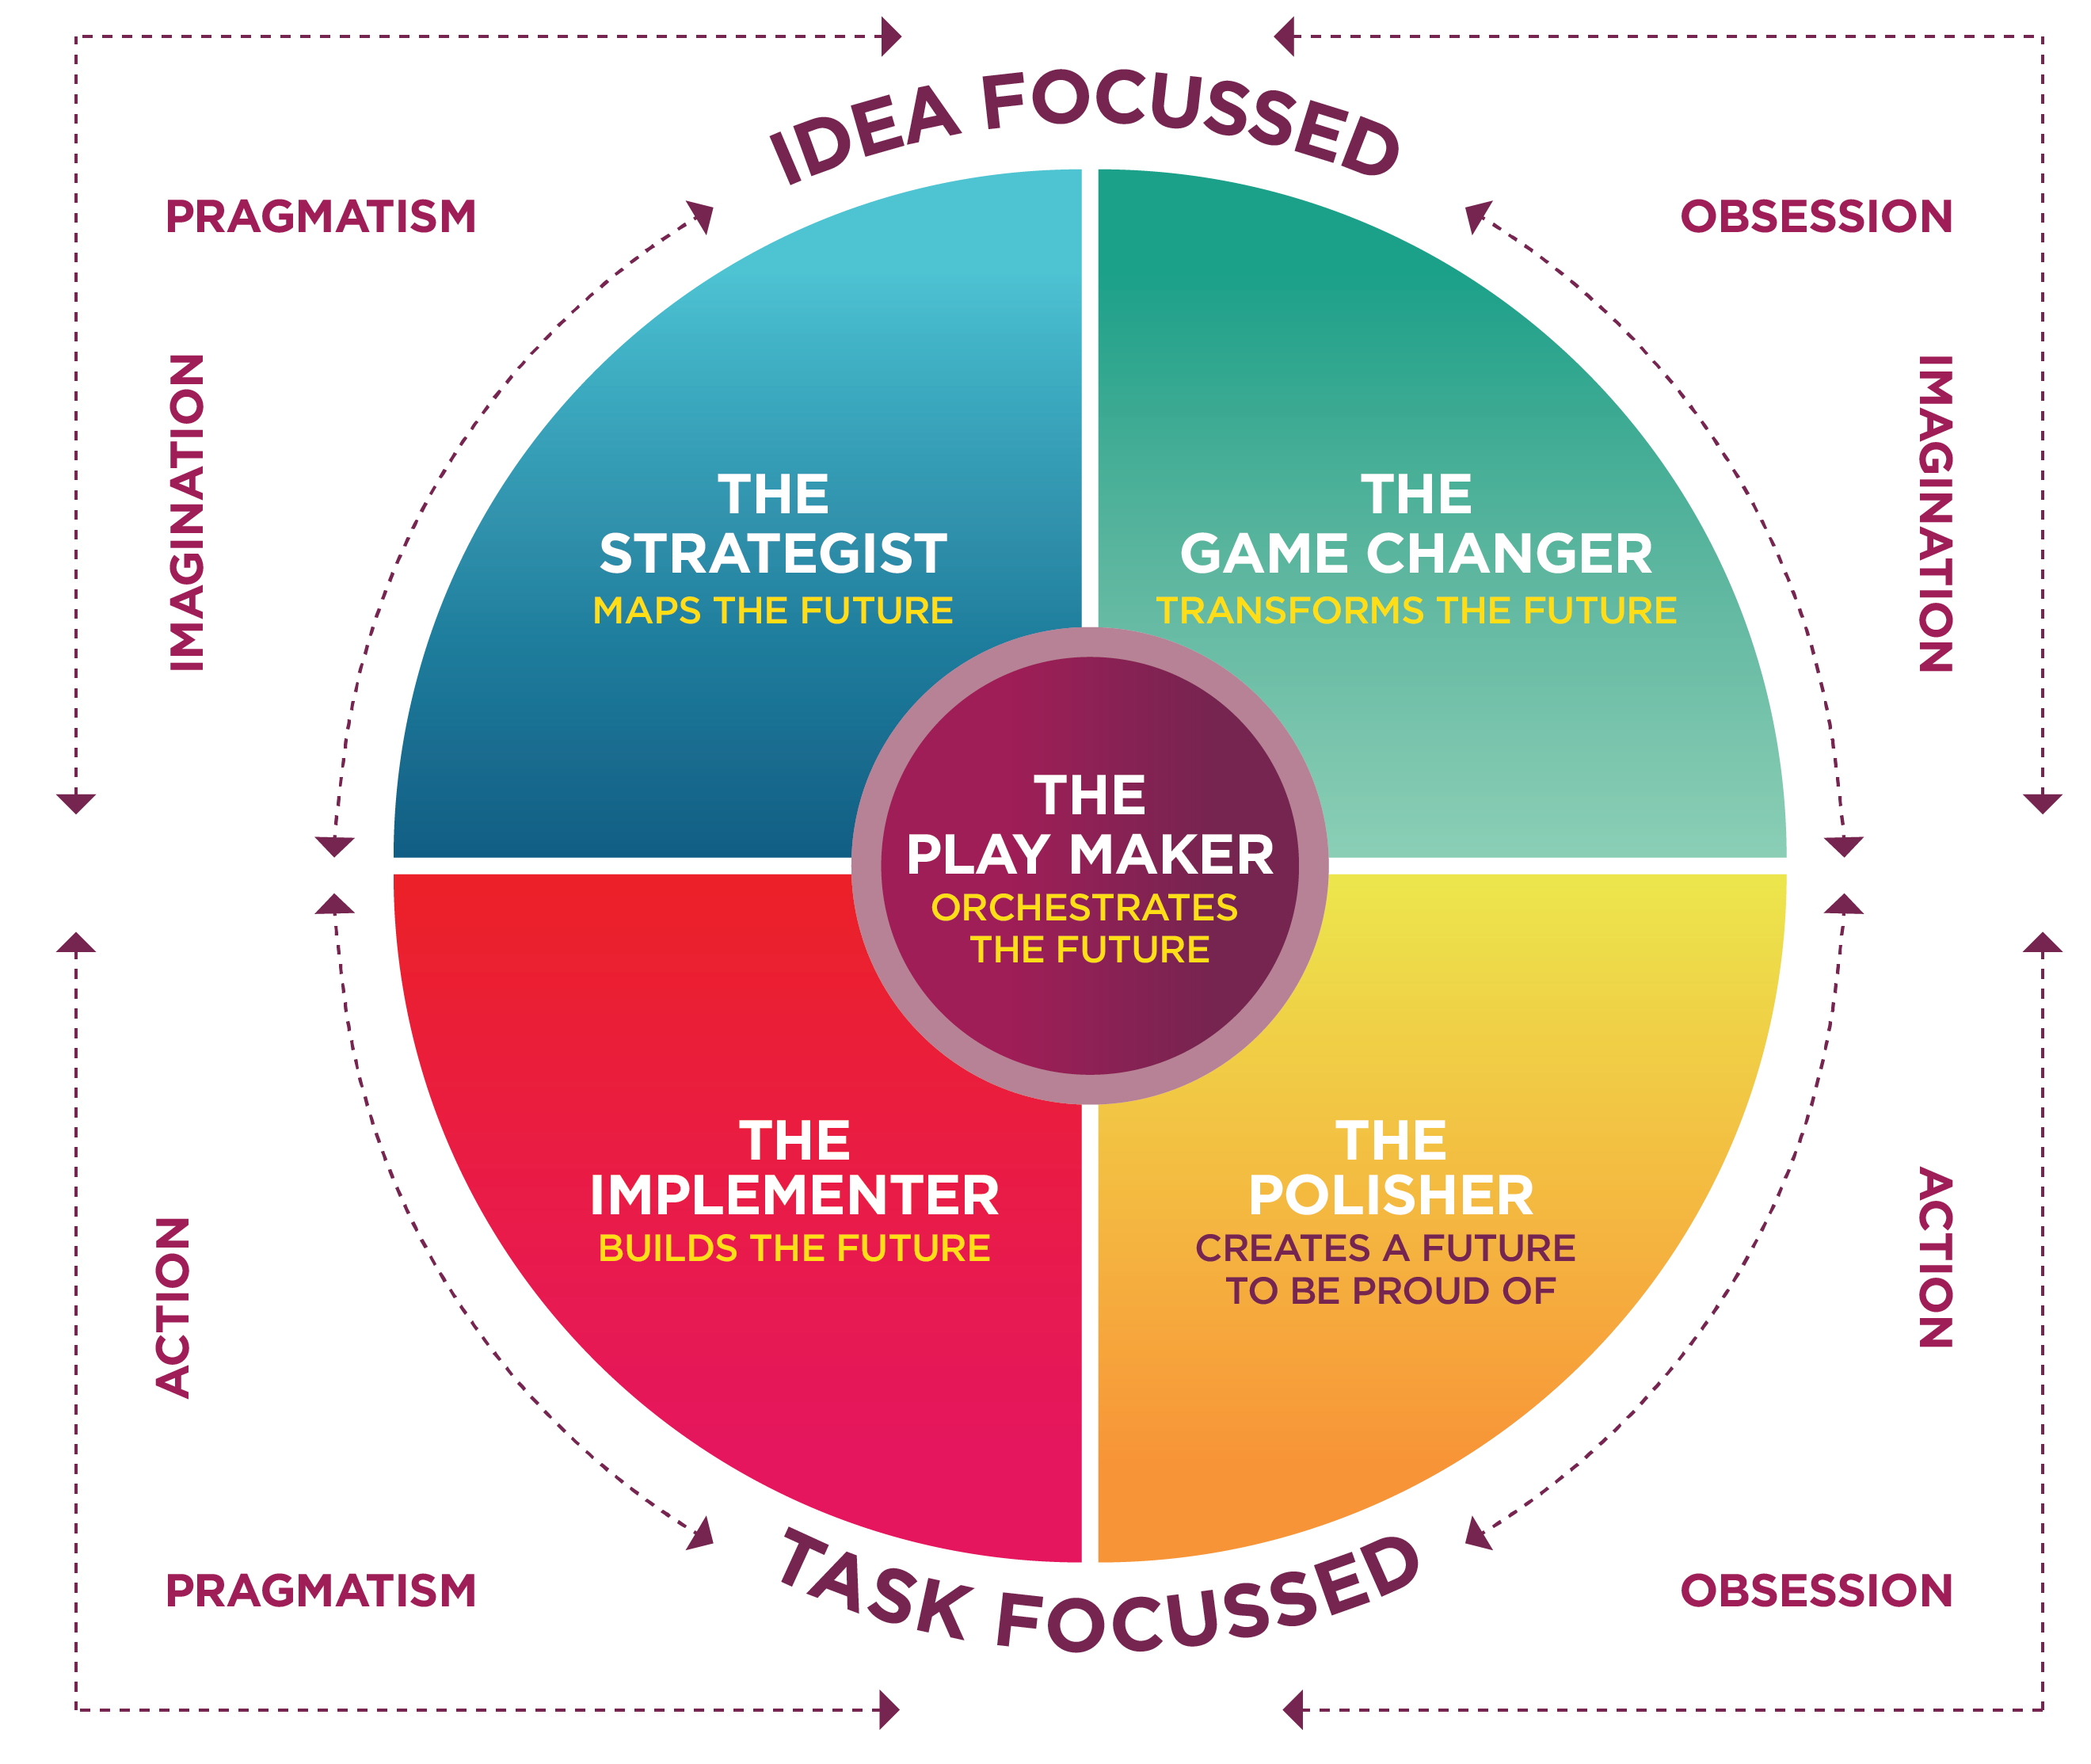 The Change Maker Profile 5 "proclivities" or styles, as a circular infographic. Blue, Green, Yellow and Red quarter segments show Strategist, Game Changer, Polisher and Implementer styles. The purple circle in the middle of this outer ring is The Play Maker.